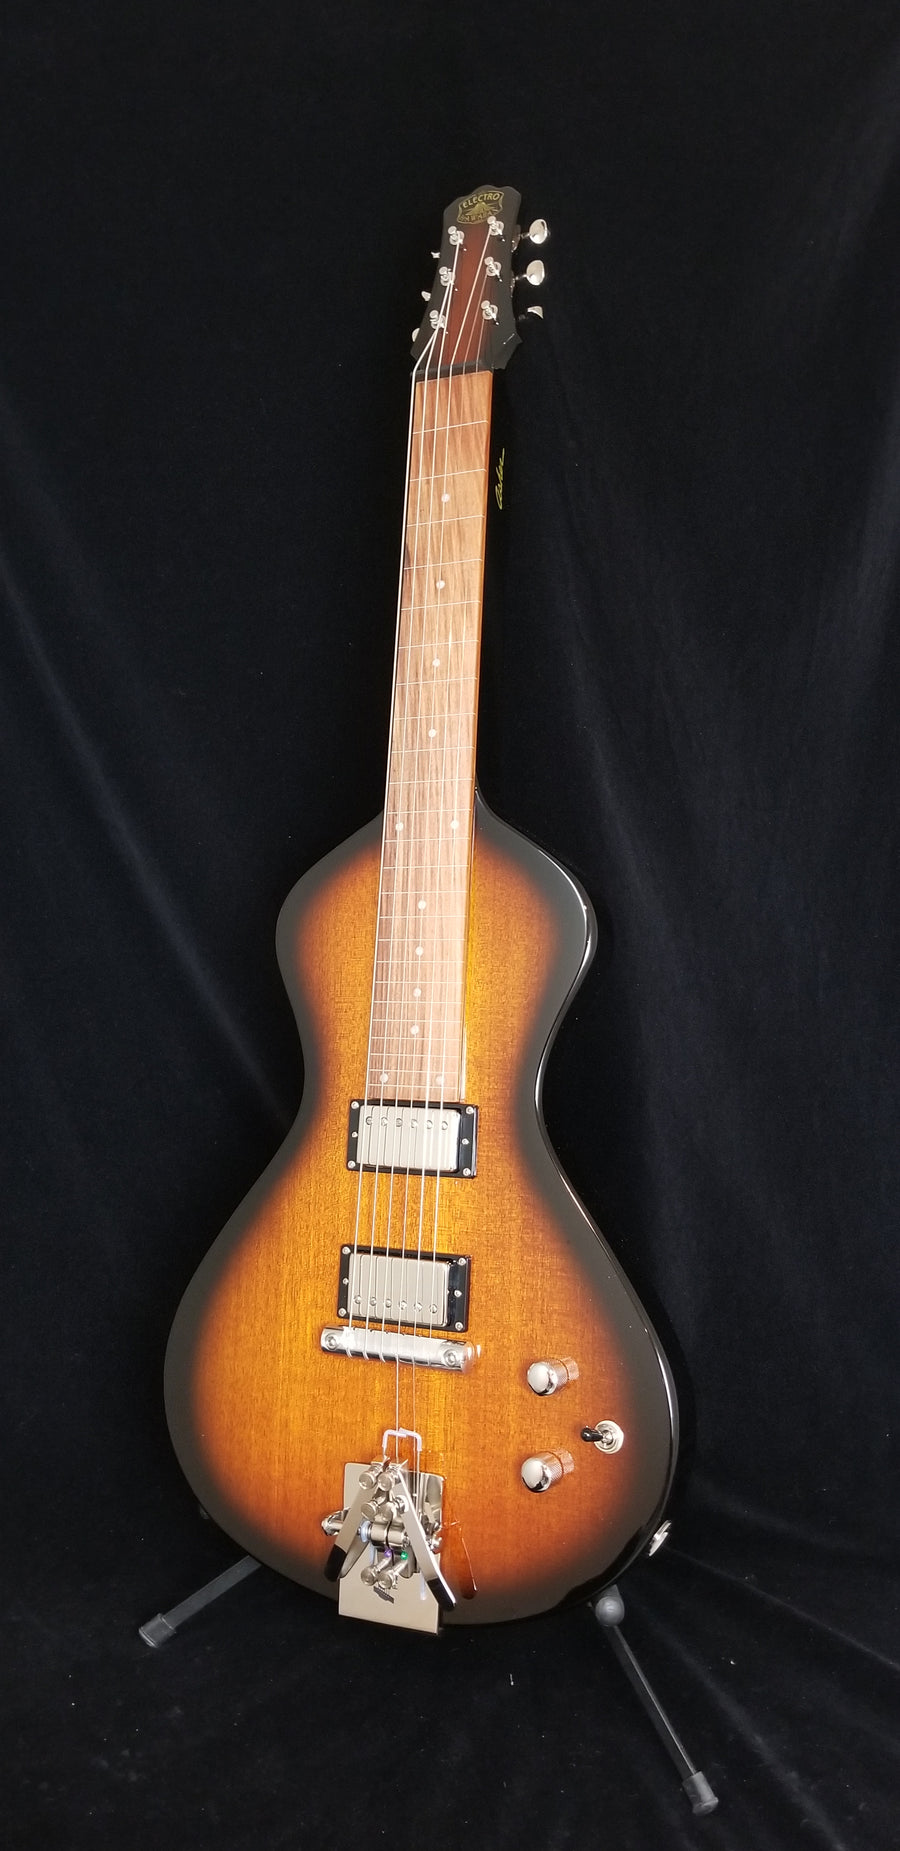 2022-23 Upgraded NEW Electro Hawaiian® Junior Lap Steel Tobacco Burst - Lollar Imperial Humbuckers, USA Electronics and Hipshot Palm Lever!